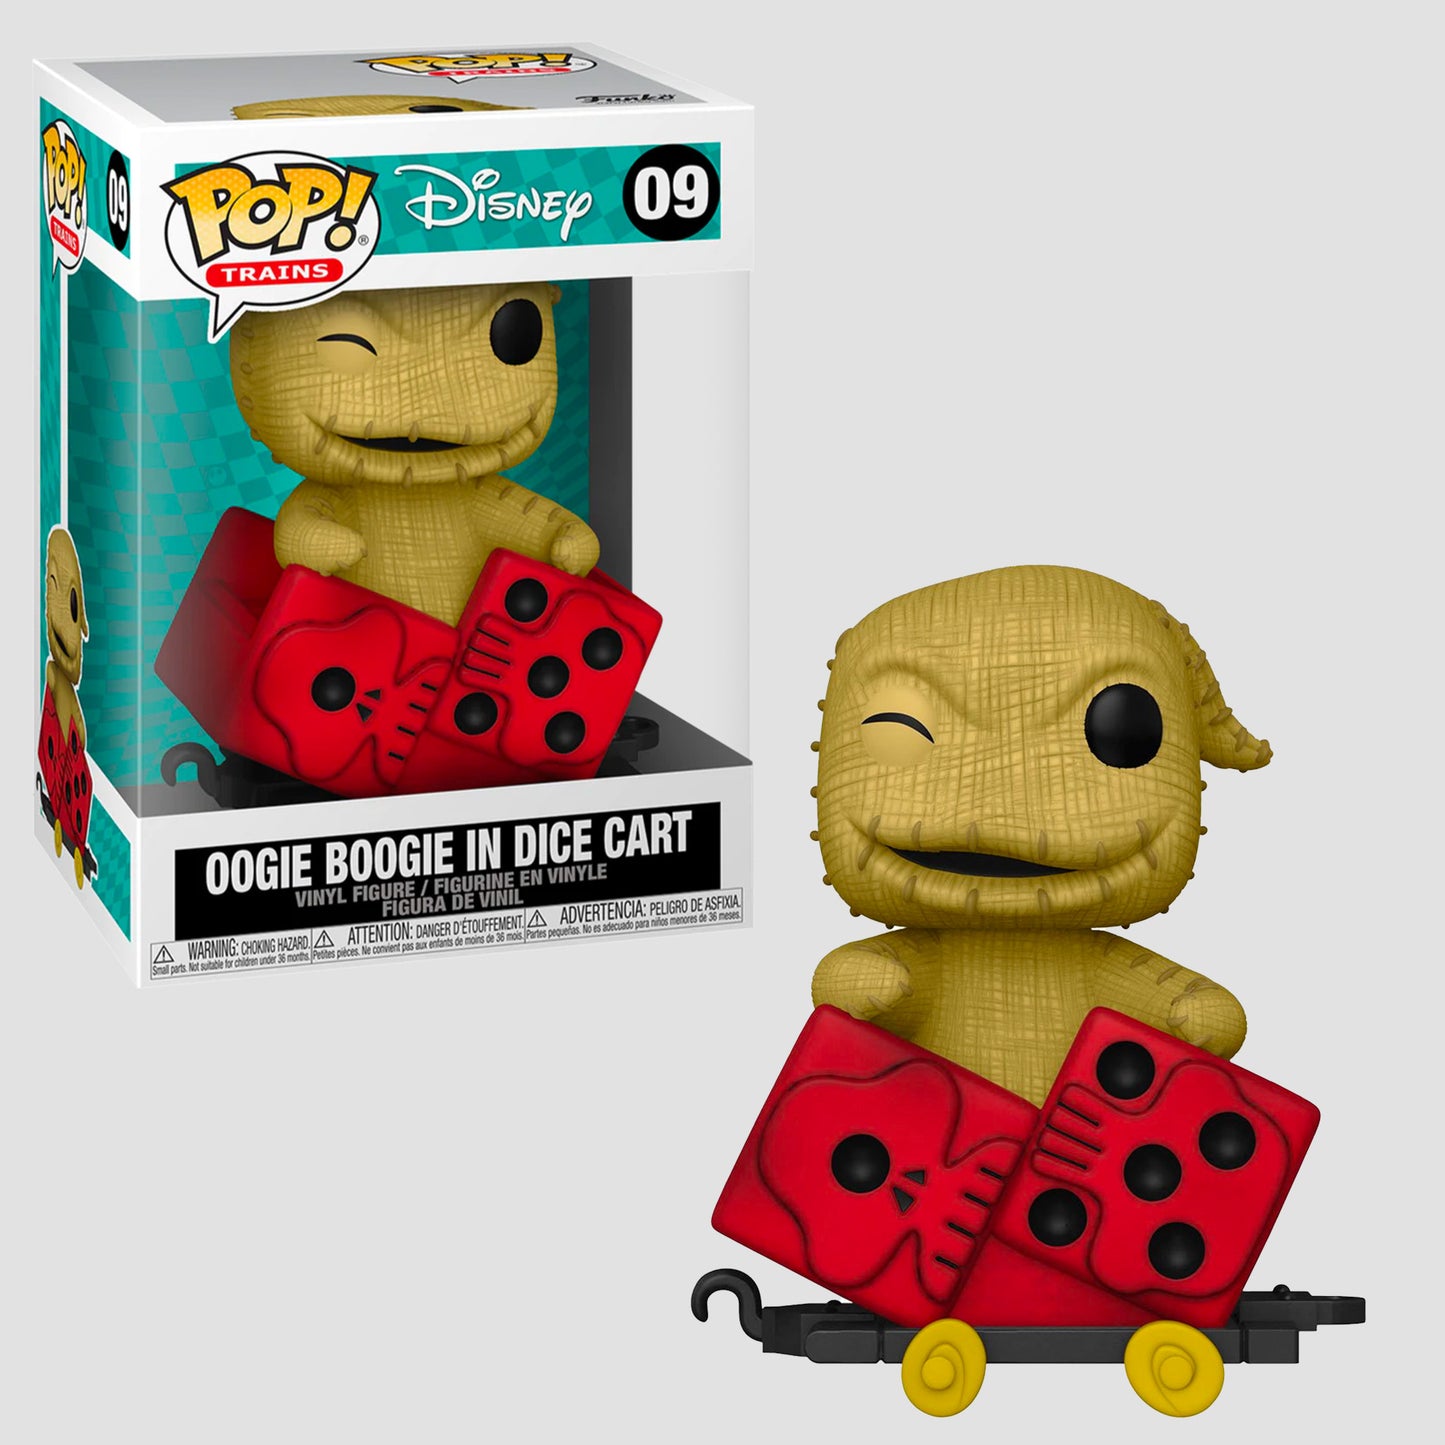 Load image into Gallery viewer, Oogie Boogin in Dice Cart (Nightmare Before Christmas) Disney Trains Funko Pop!
